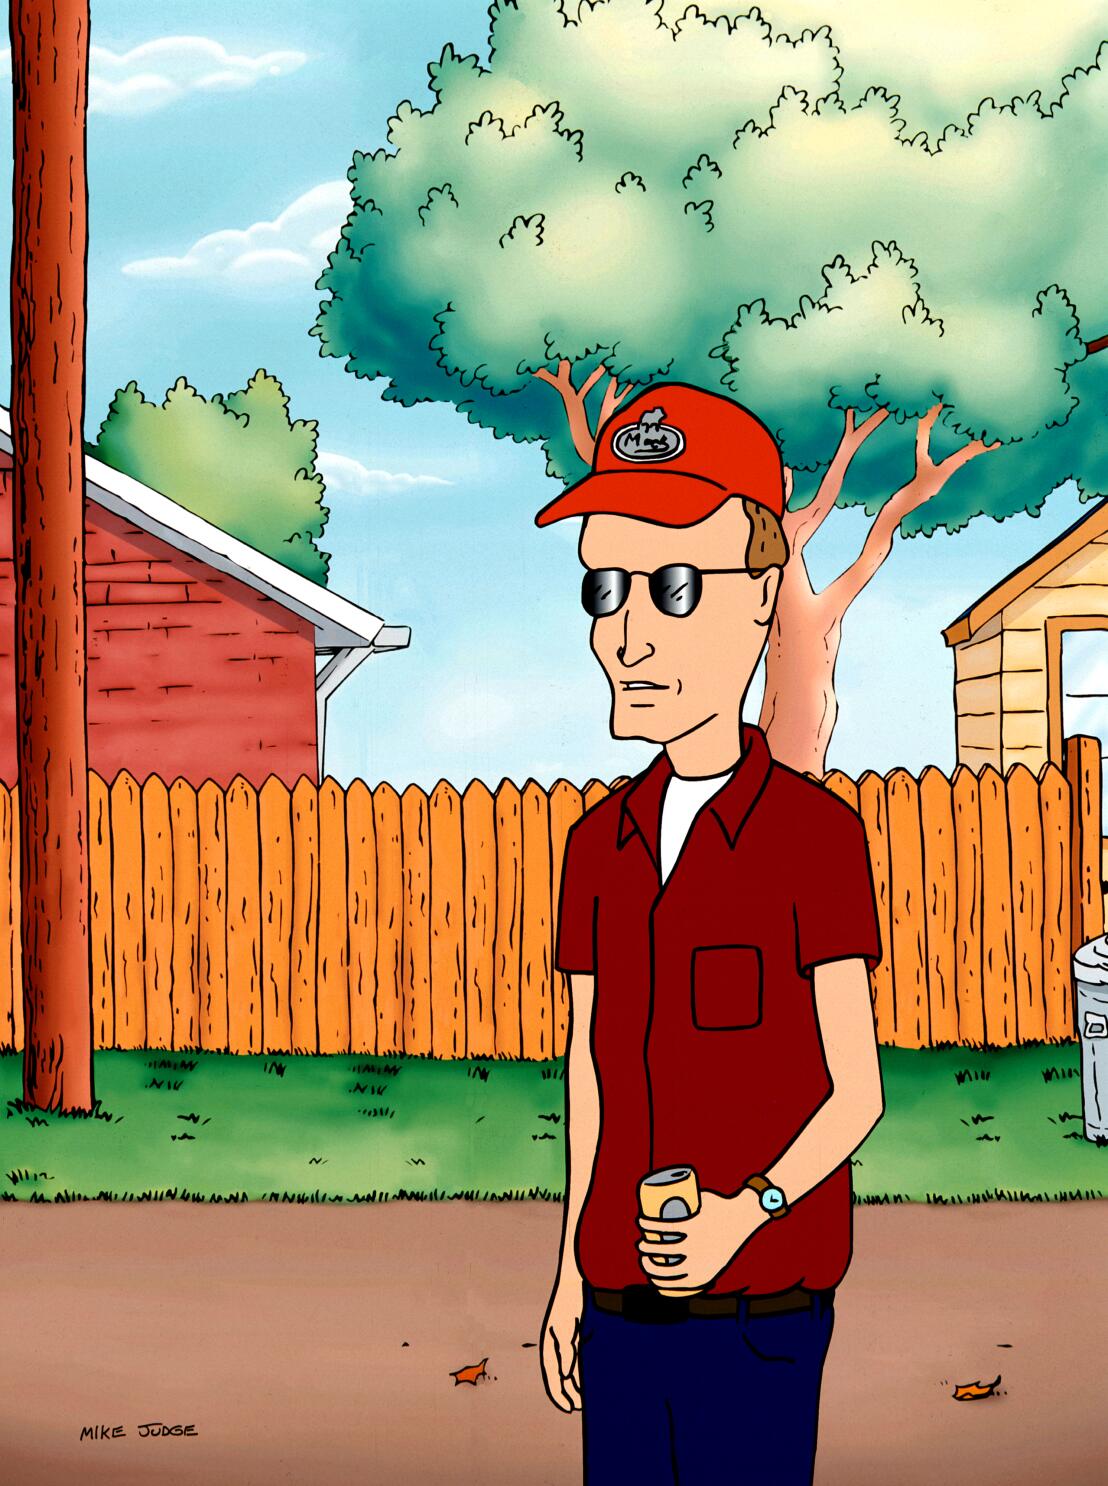 King of the Hill star Johnny Hardwick recorded new episodes before death